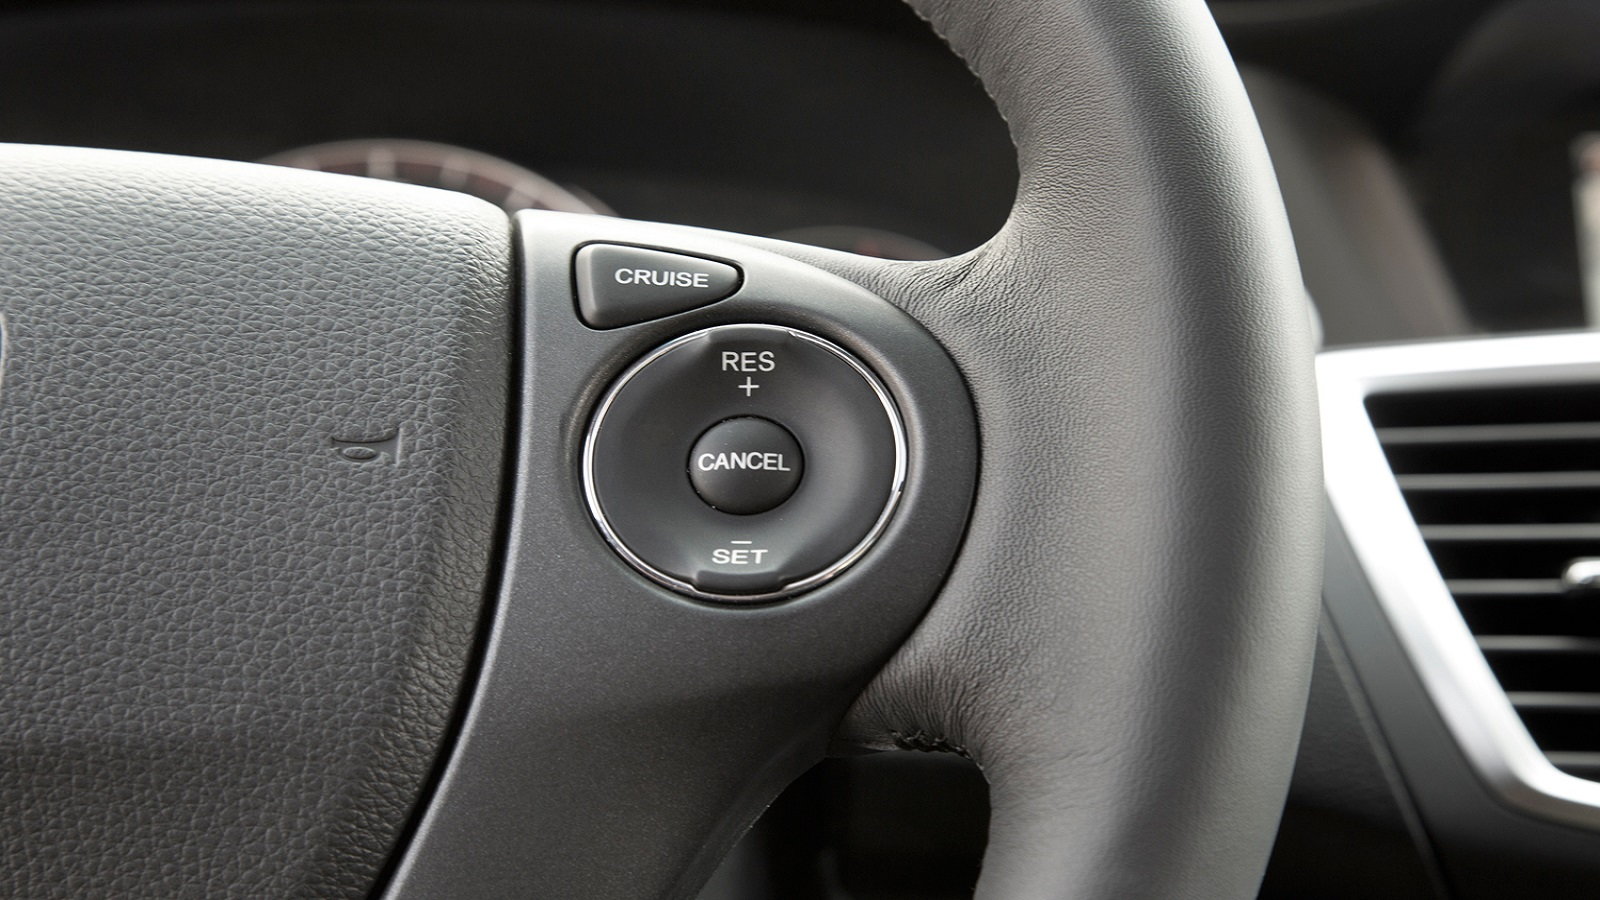 Honda Civic: Why is My Cruise Control Not Working? | Honda-tech 2003 Honda Crv Cruise Control Not Working